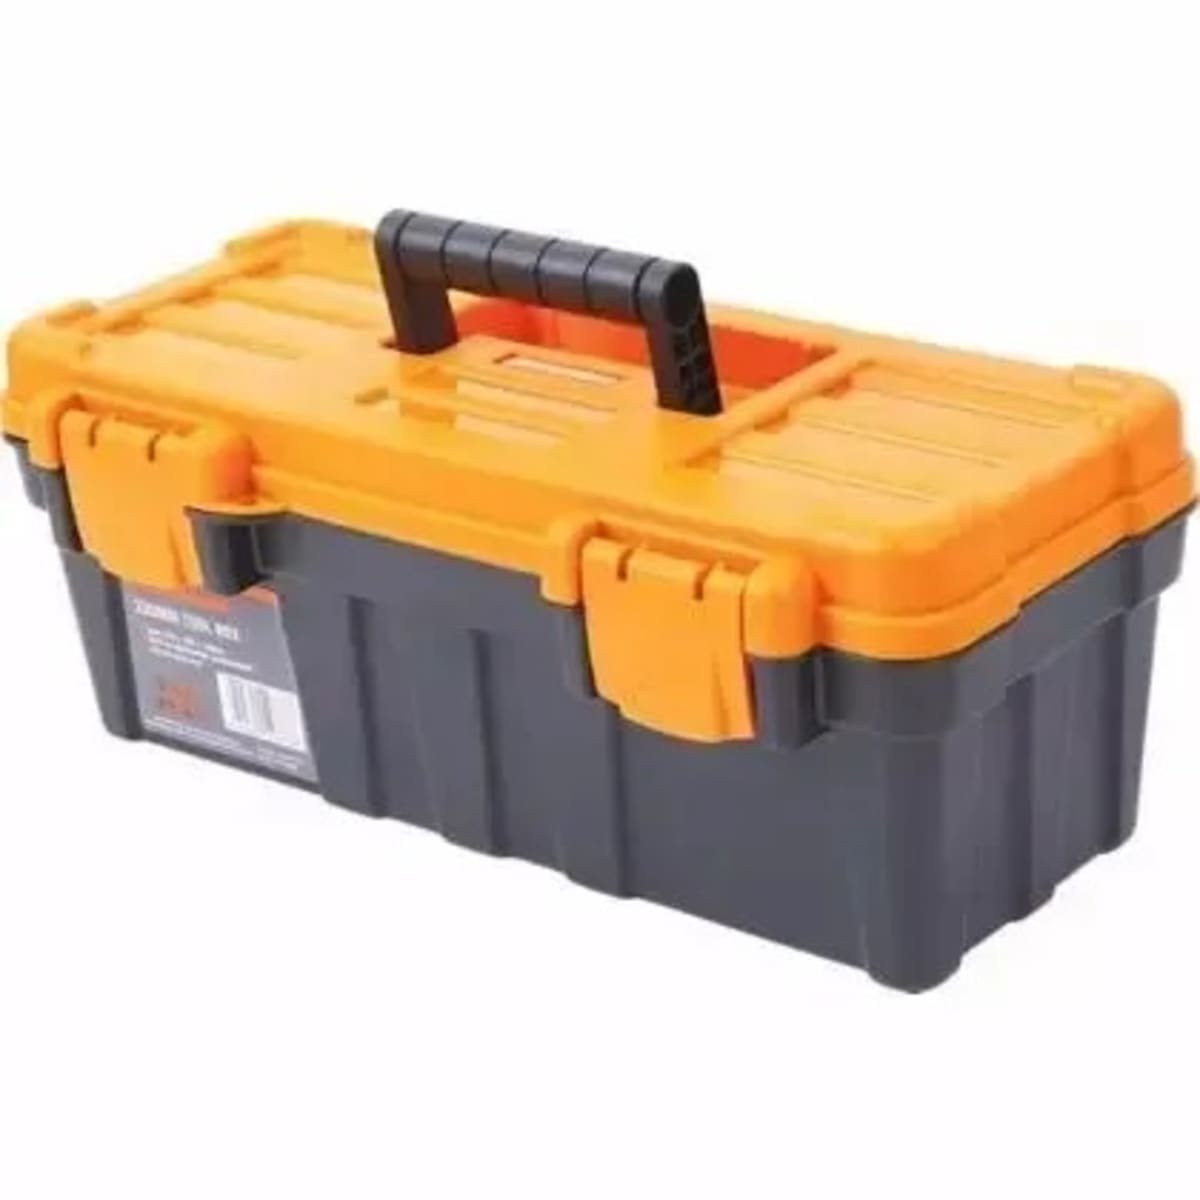 Plastic Tool Box With Handle - Tray & Compartment Storage - 13